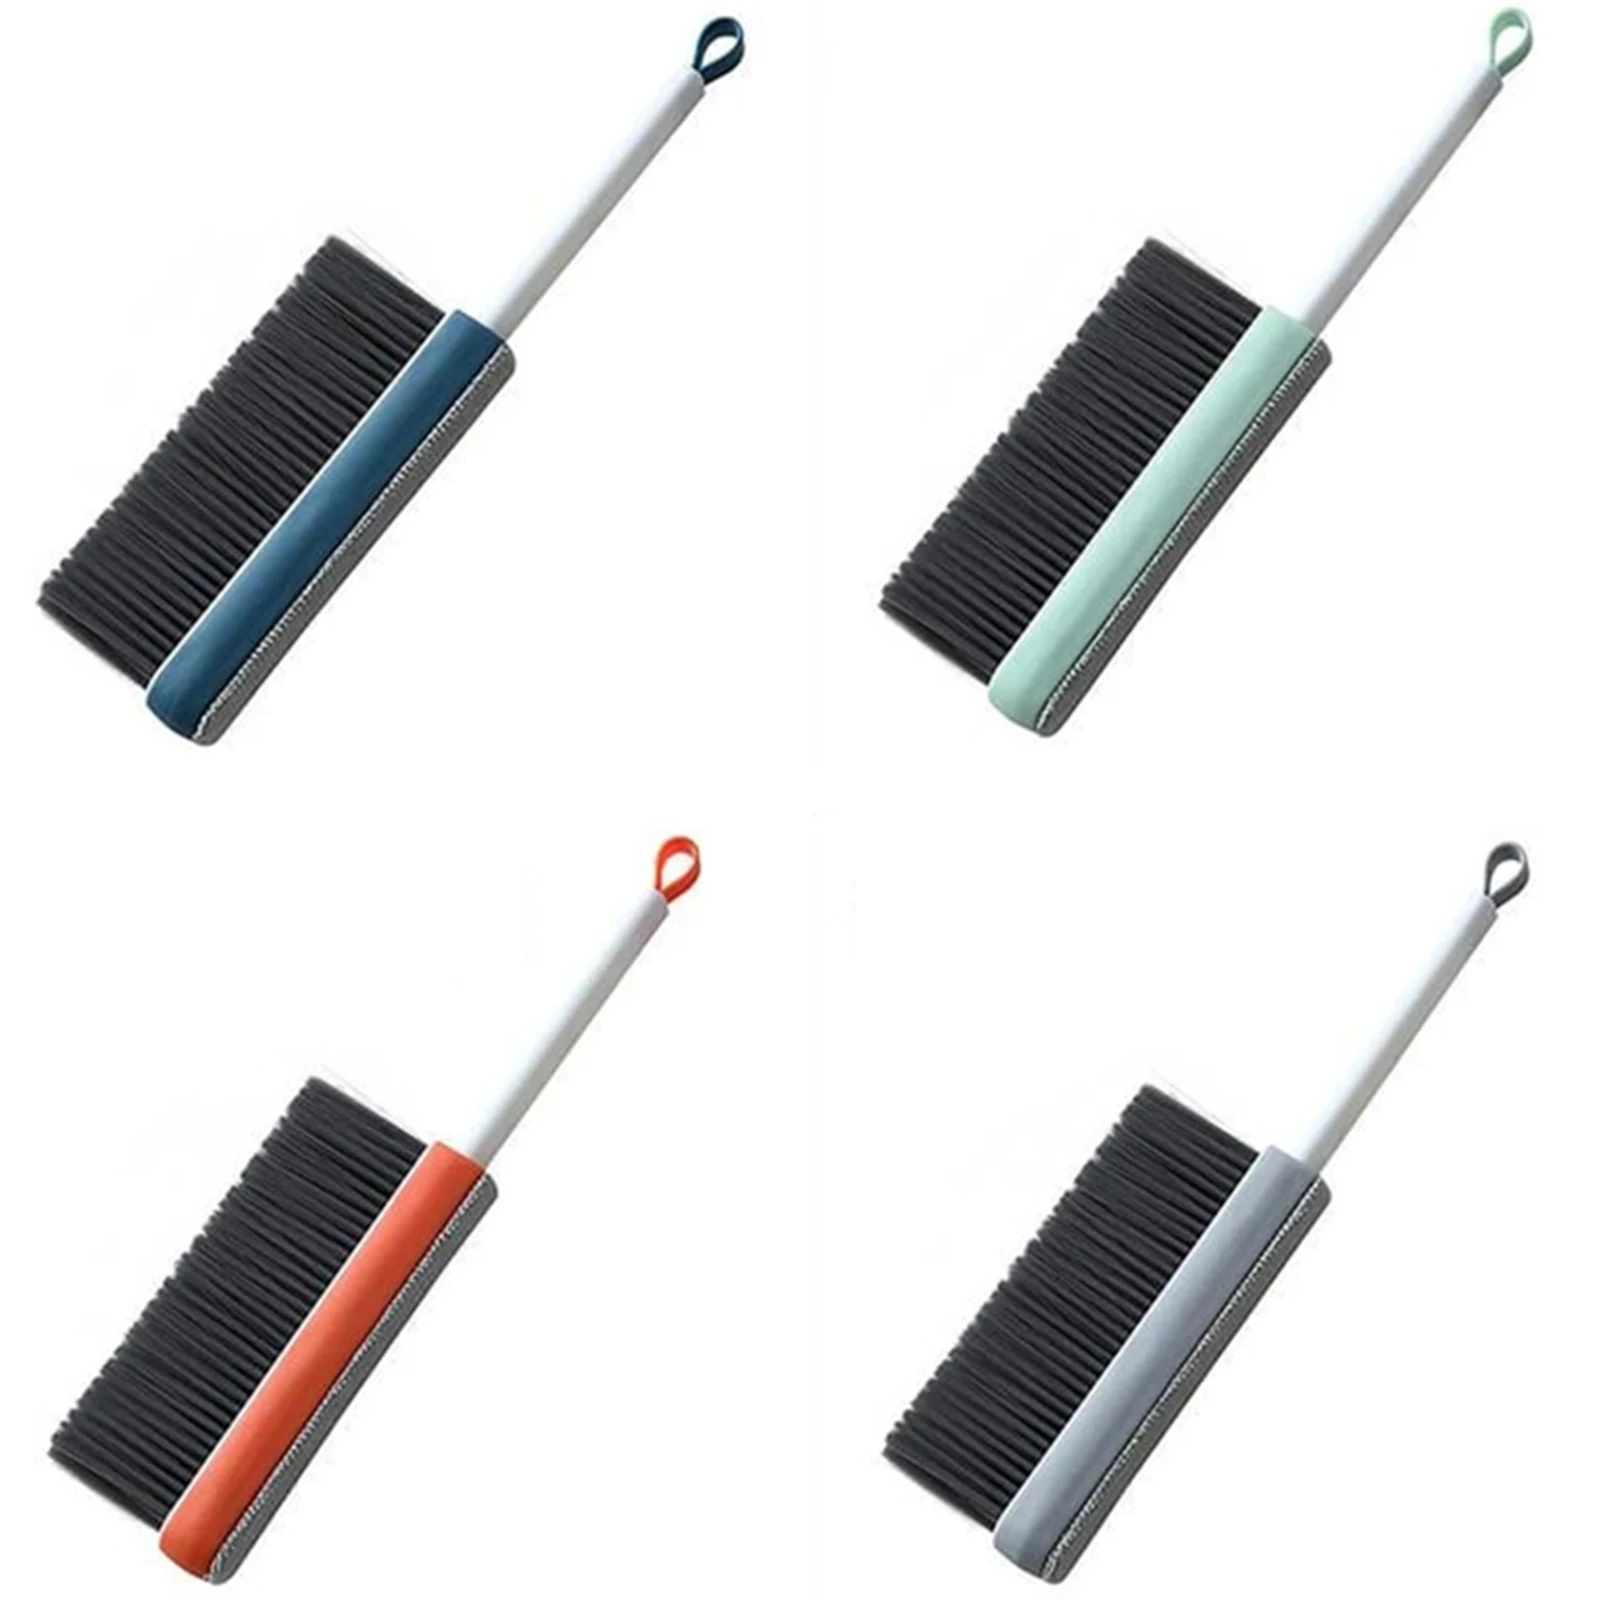 

Double-sided Multi-purpose Cleaning Brush Scalable Portable Easy To Use Dusting Tool For Home Car